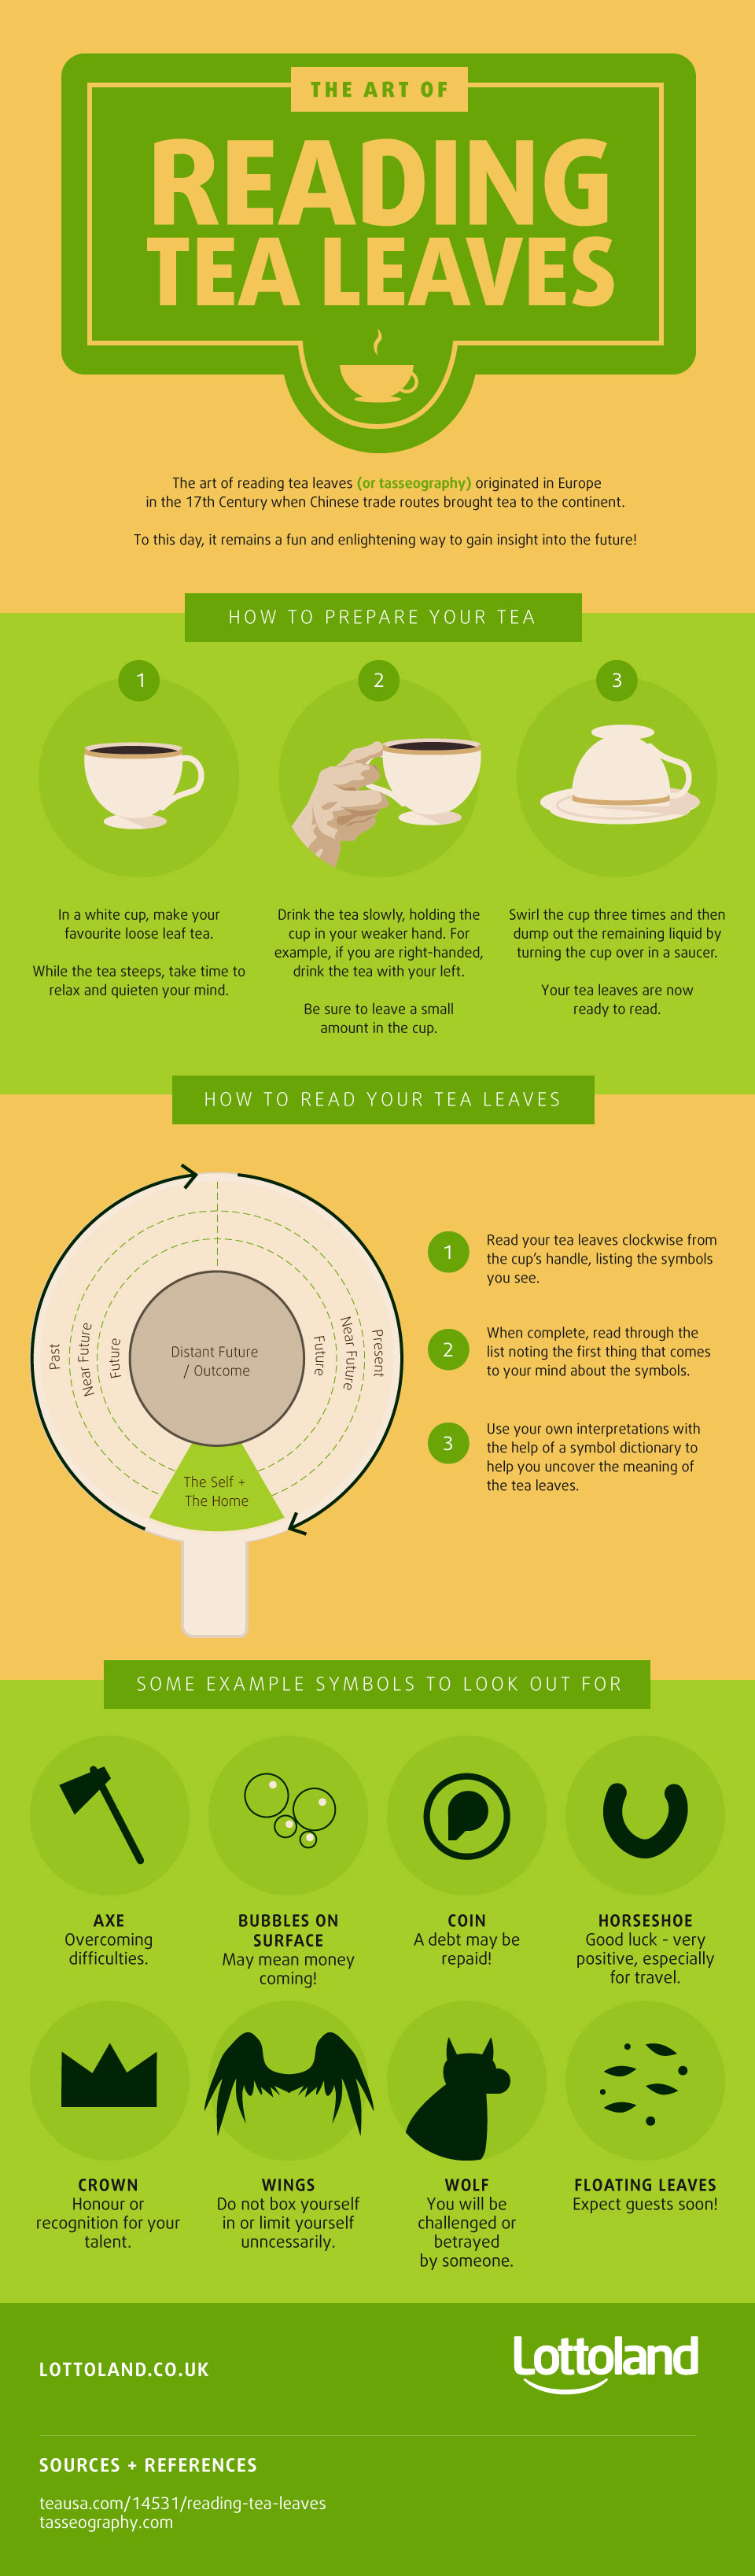 How To Read Tea Leaves